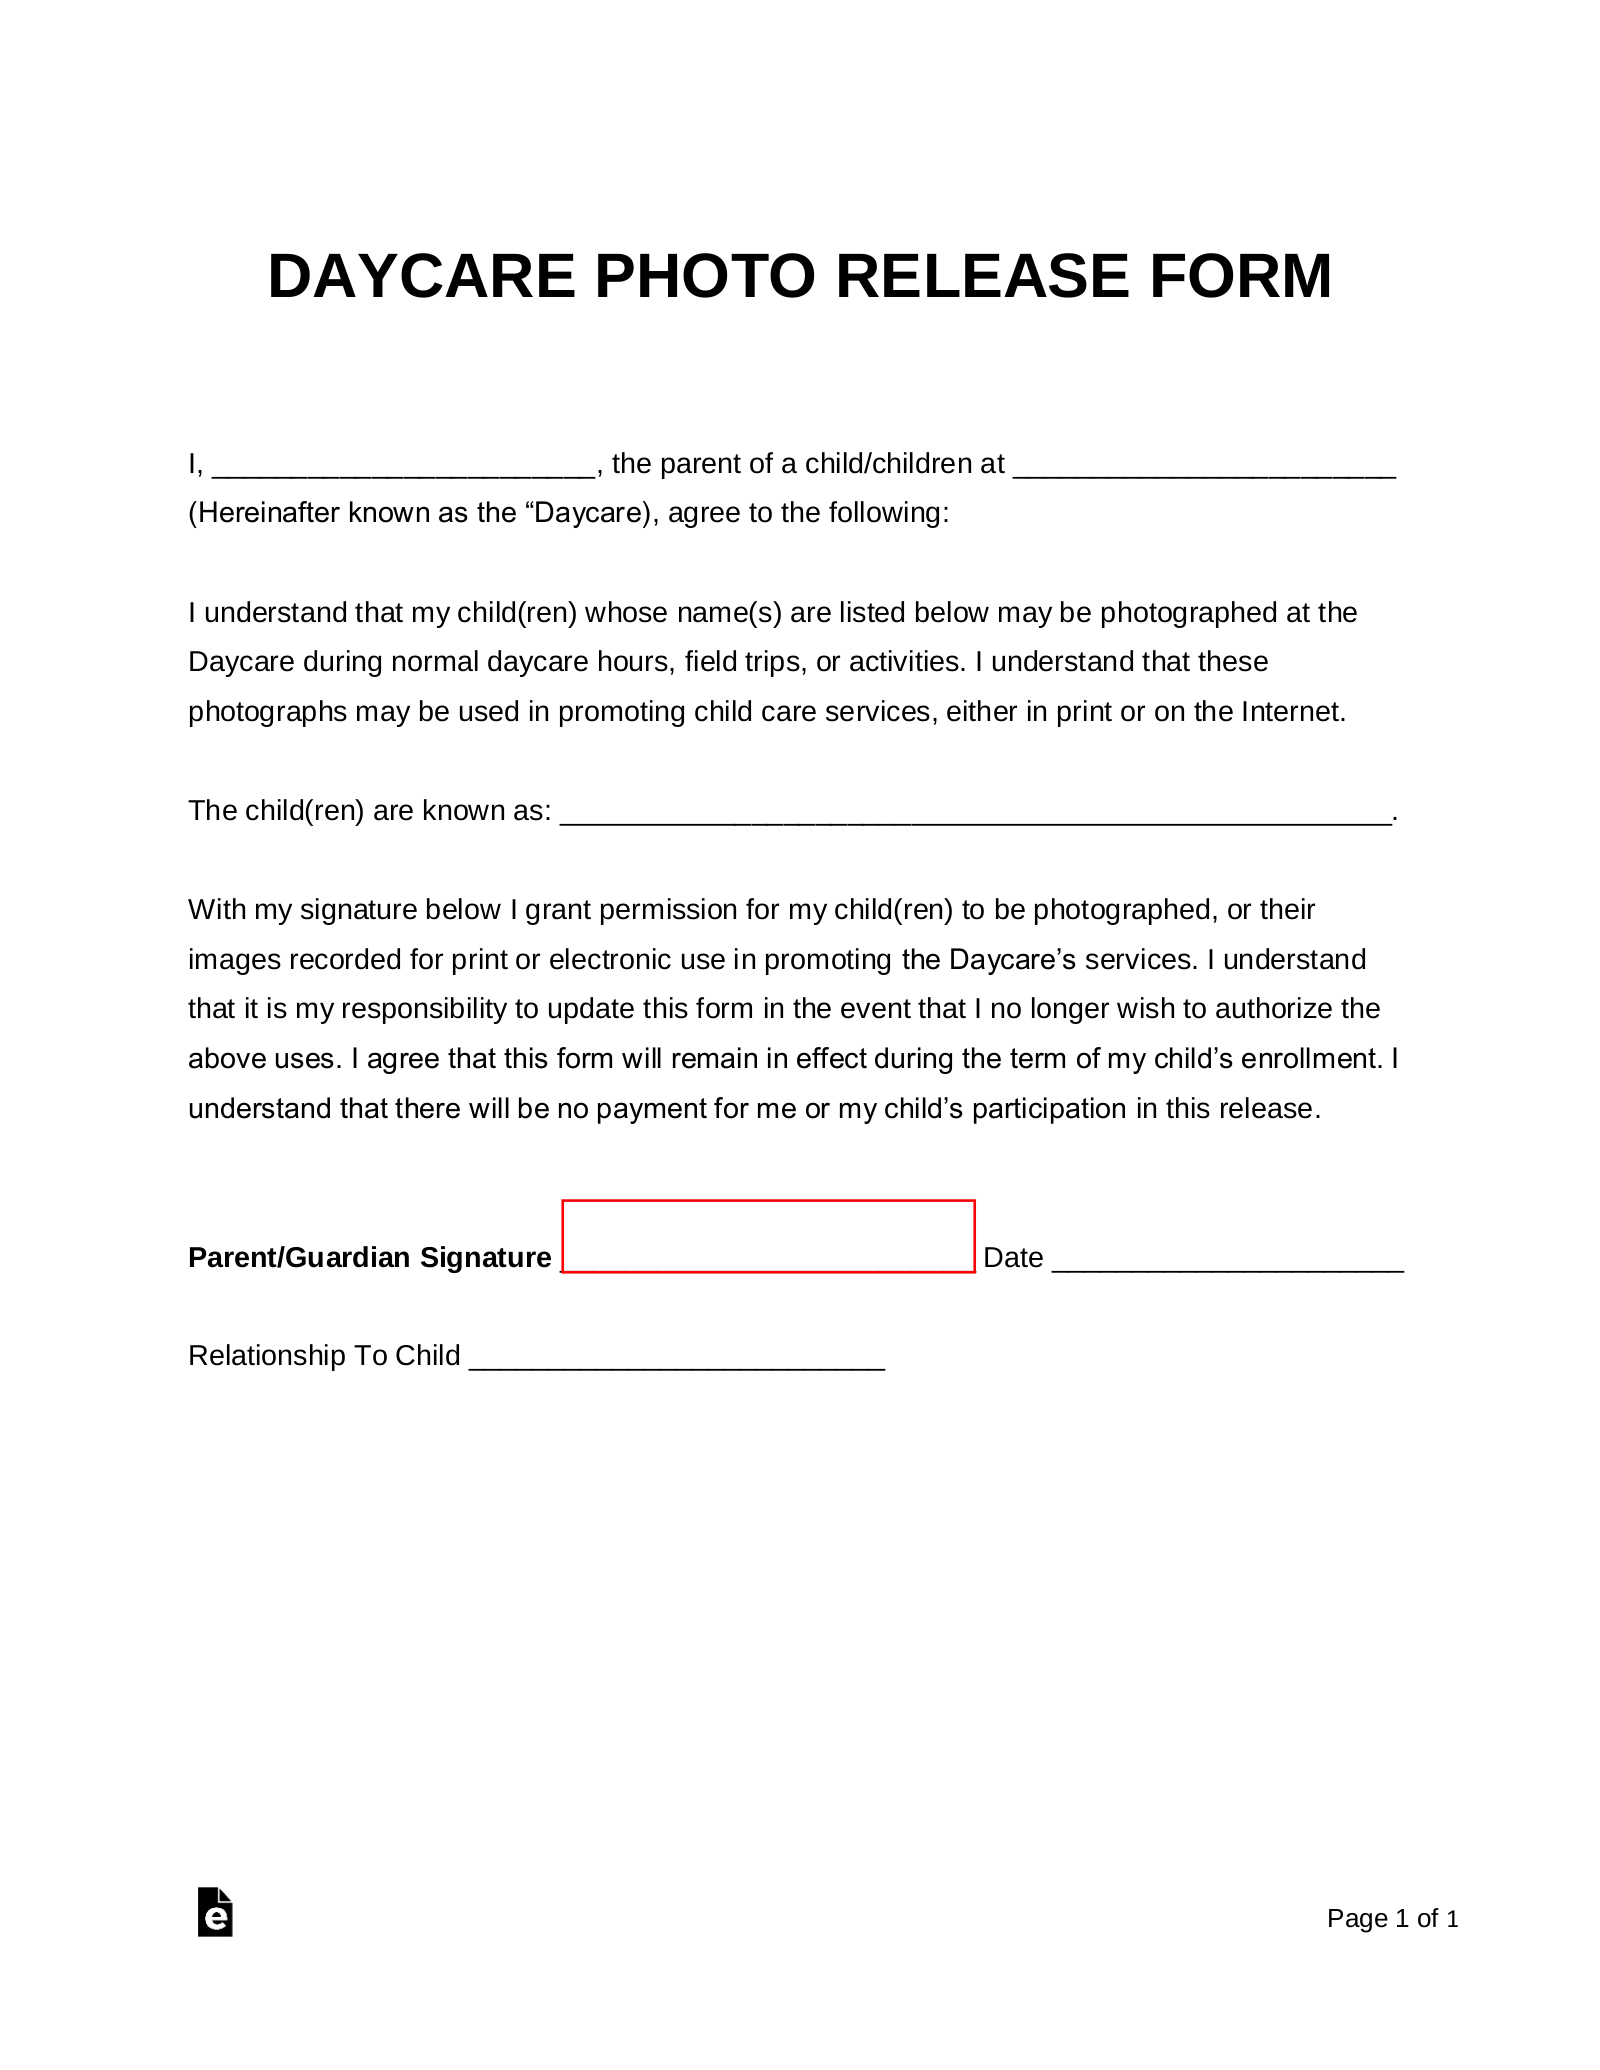 Free Daycare Photo Release Form PDF Word EForms